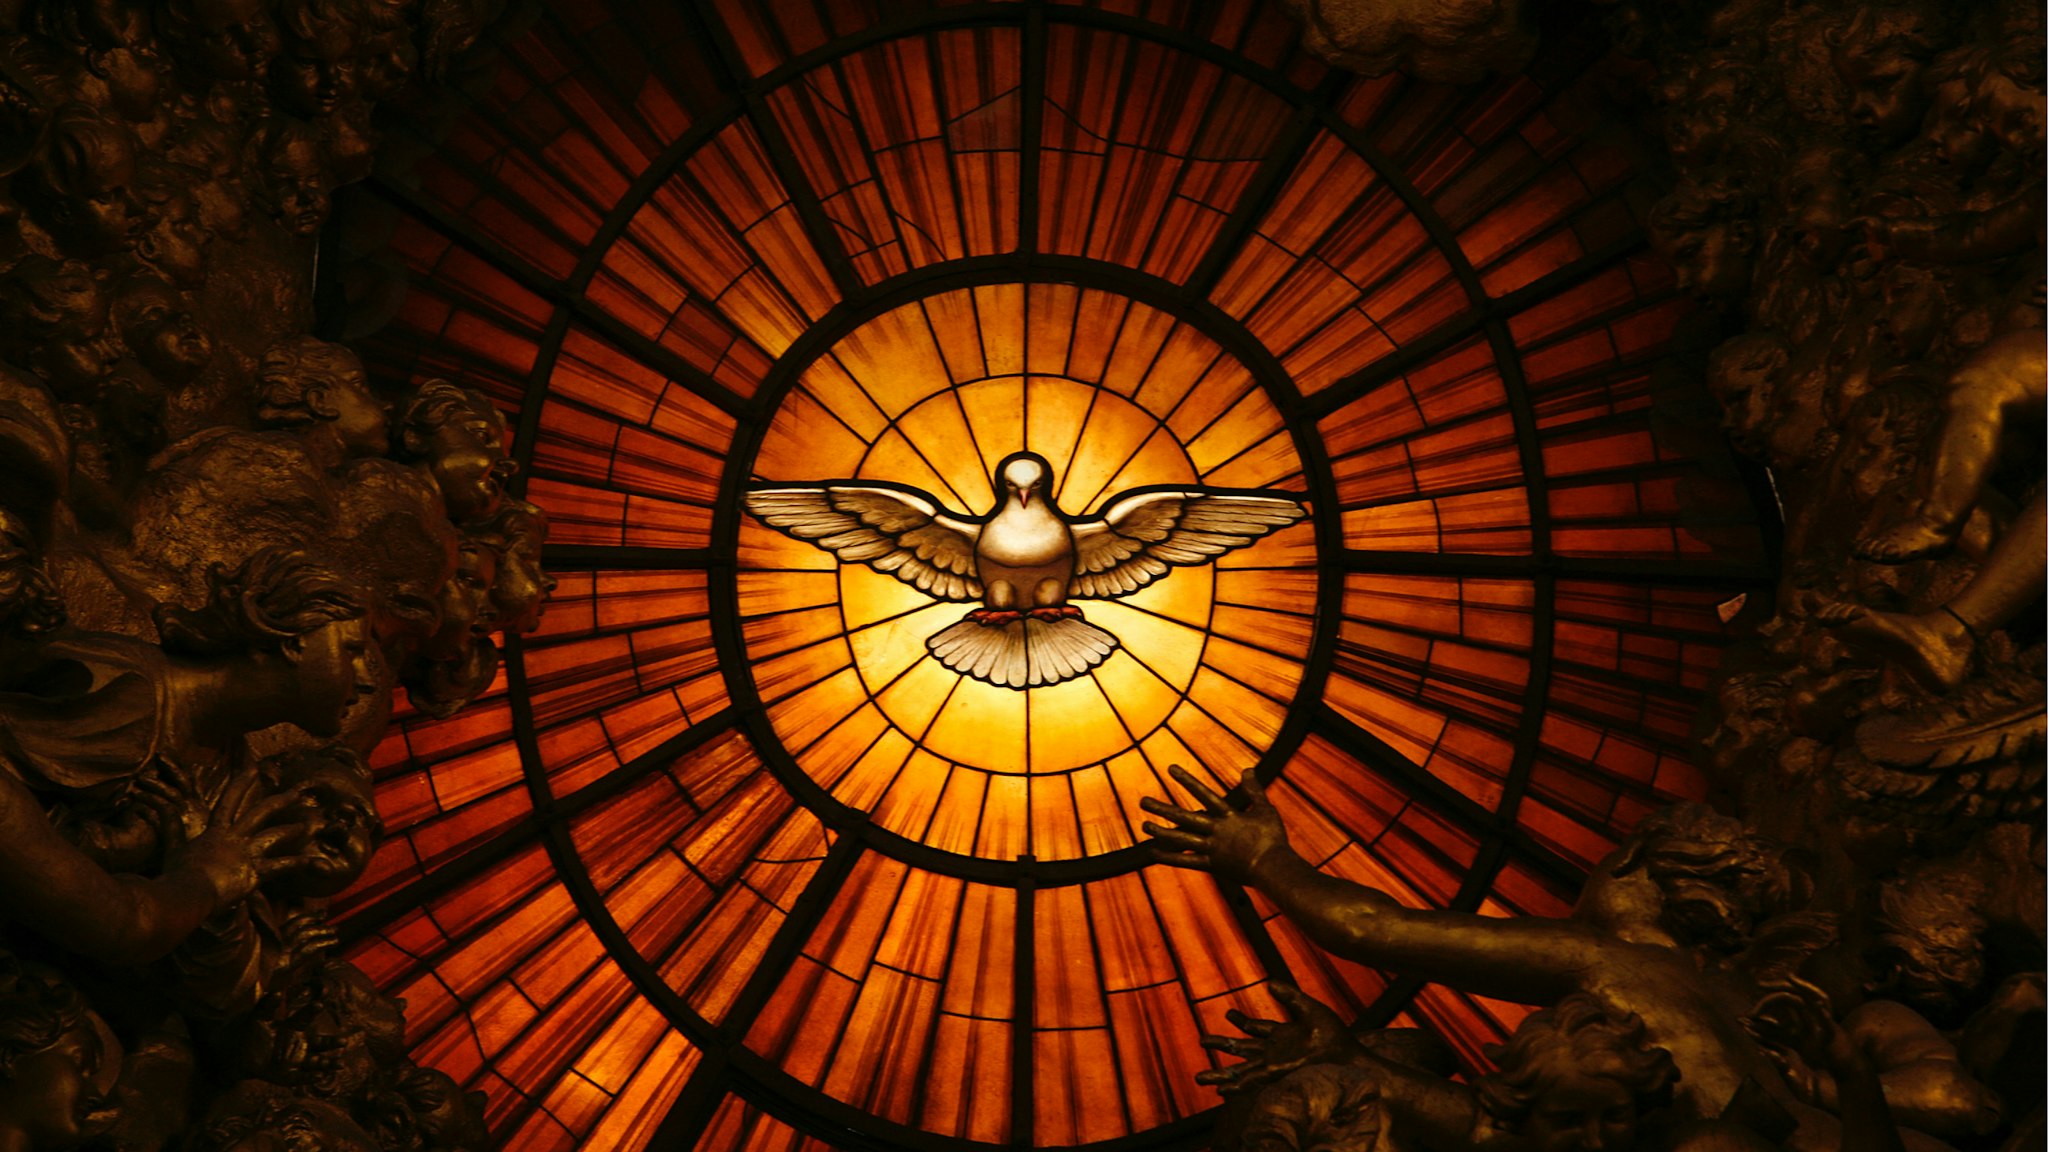 A detail showing the Holy Spirit from Cathedra Petri by Gian Lorenzo Bernini in St. Peter's Basilica.